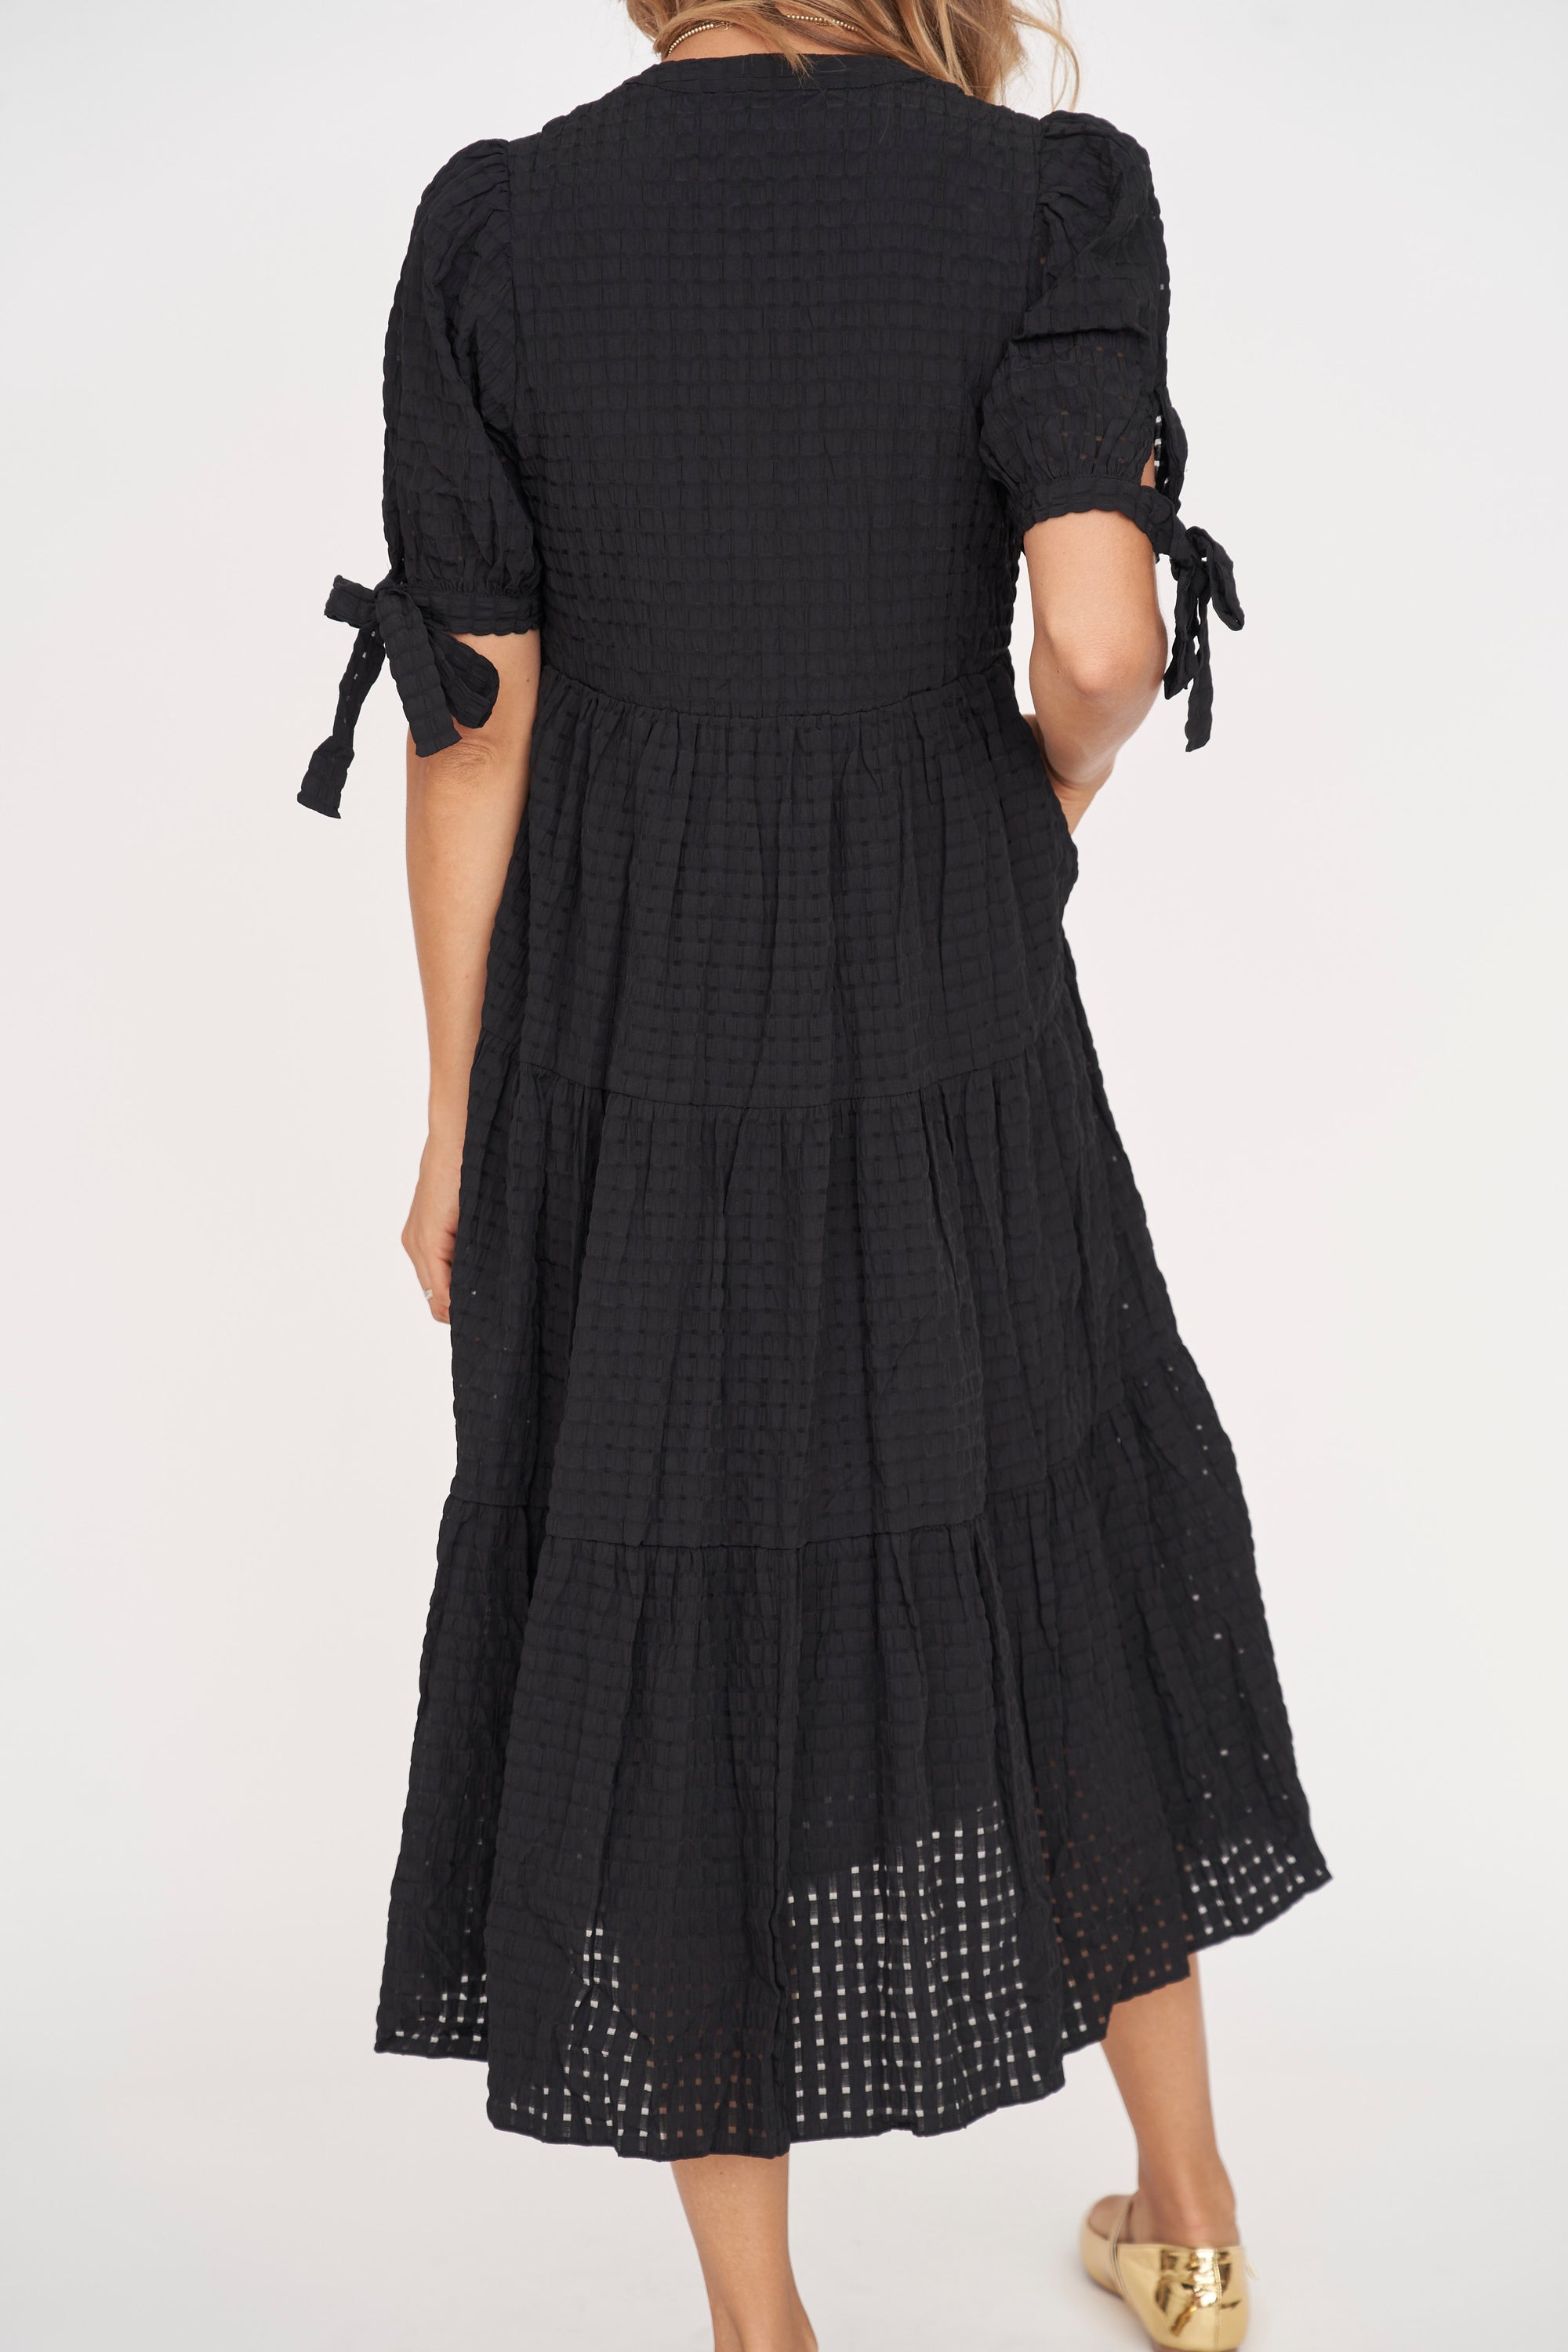 Gingham Tiered Dress with Bow-Tie Sleeves in Black